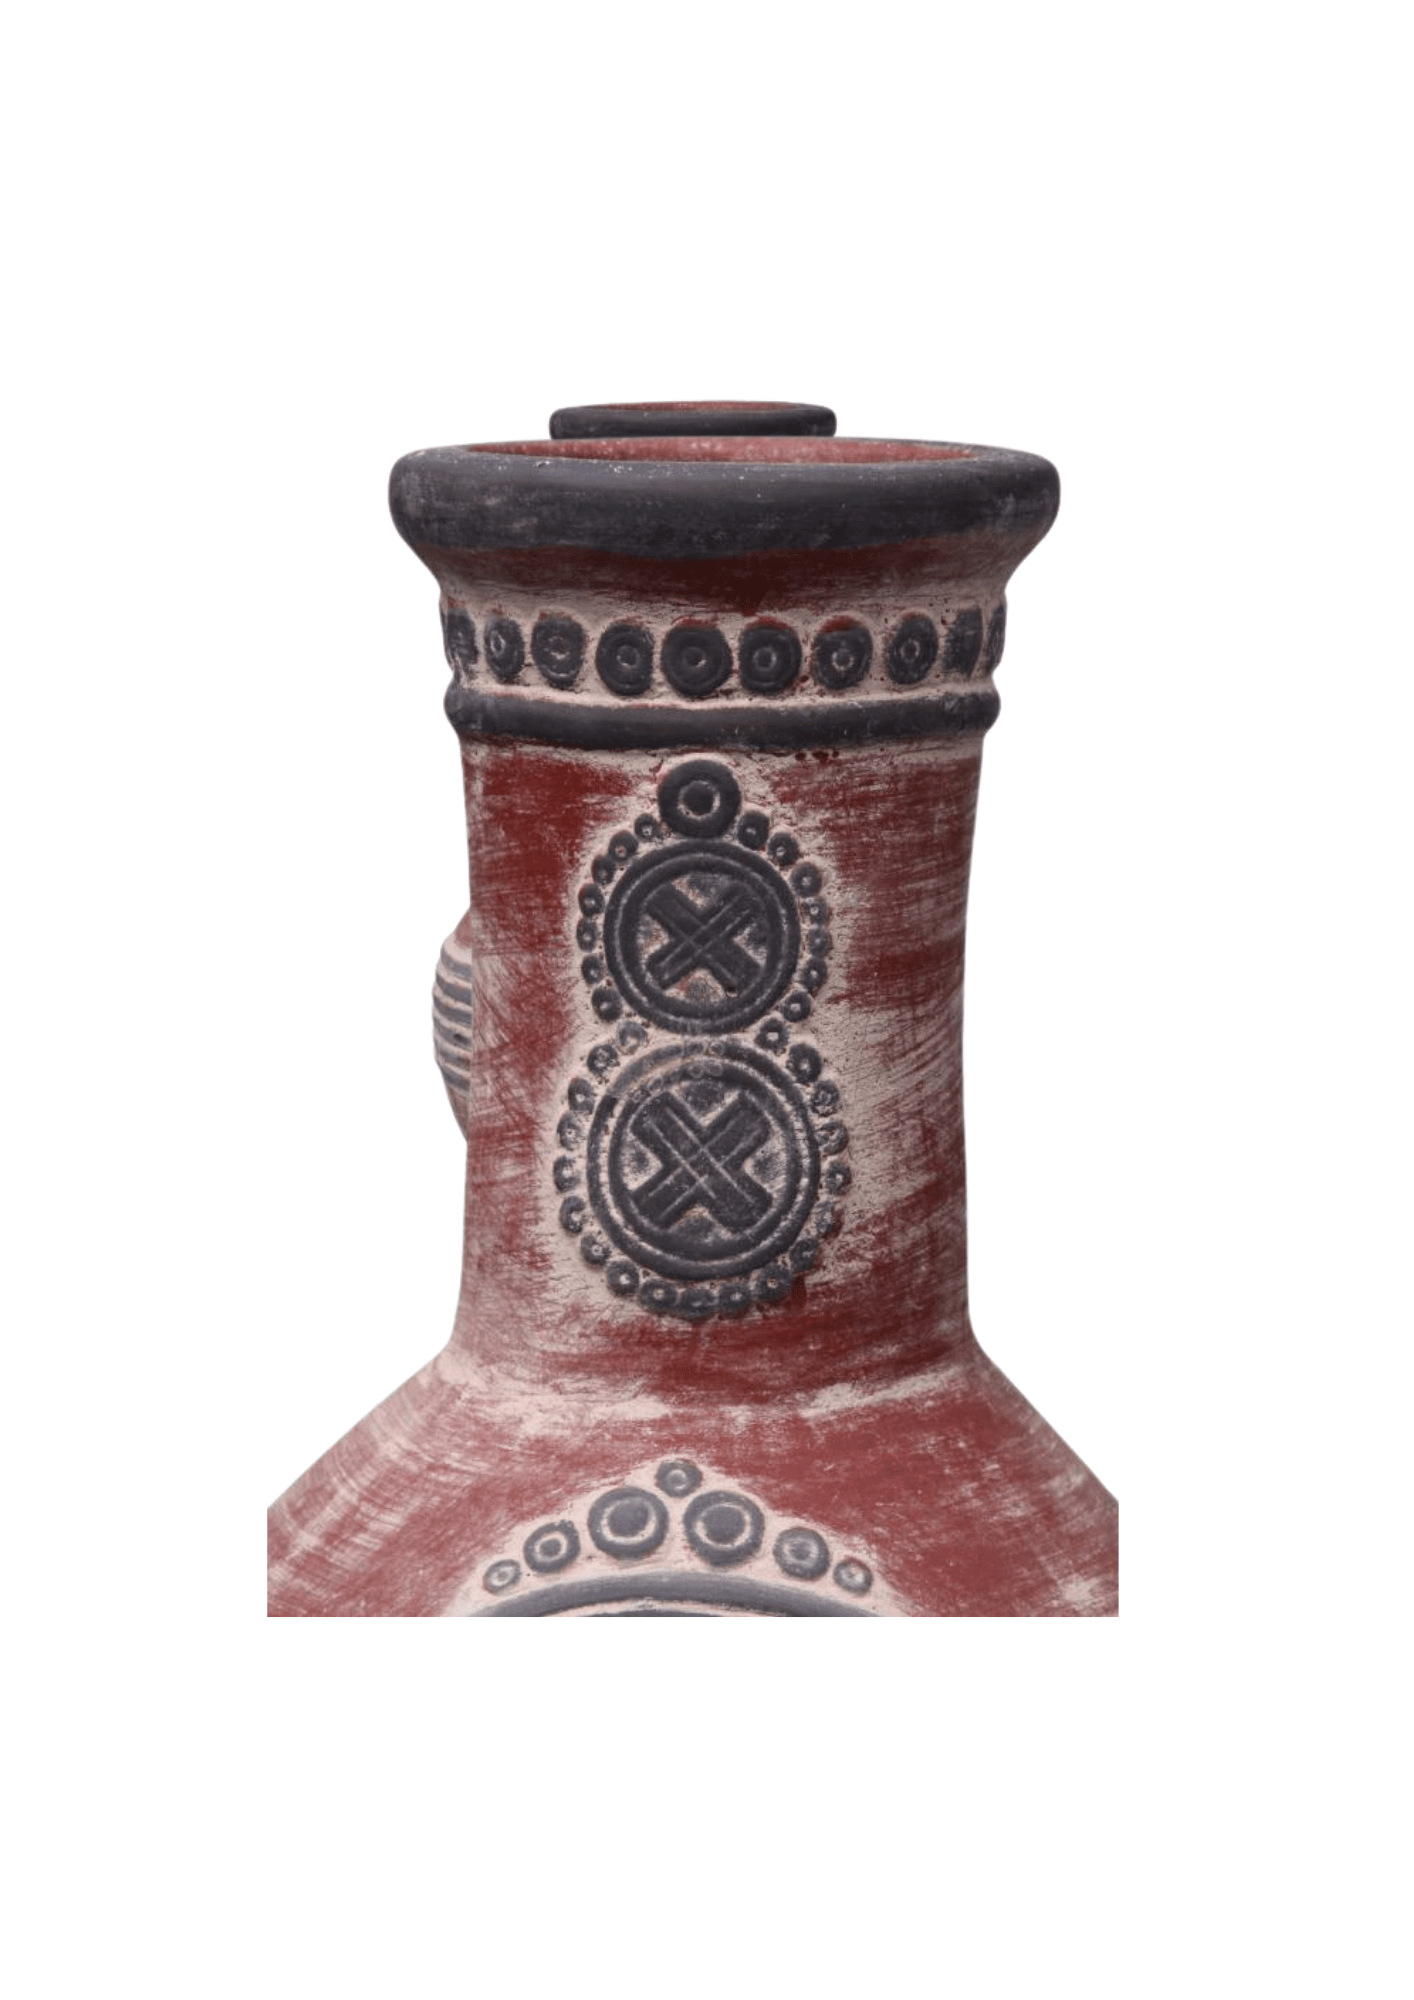 Perfect Patio UK Azteca XL Mexican Chimenea in red with grey mouth and top